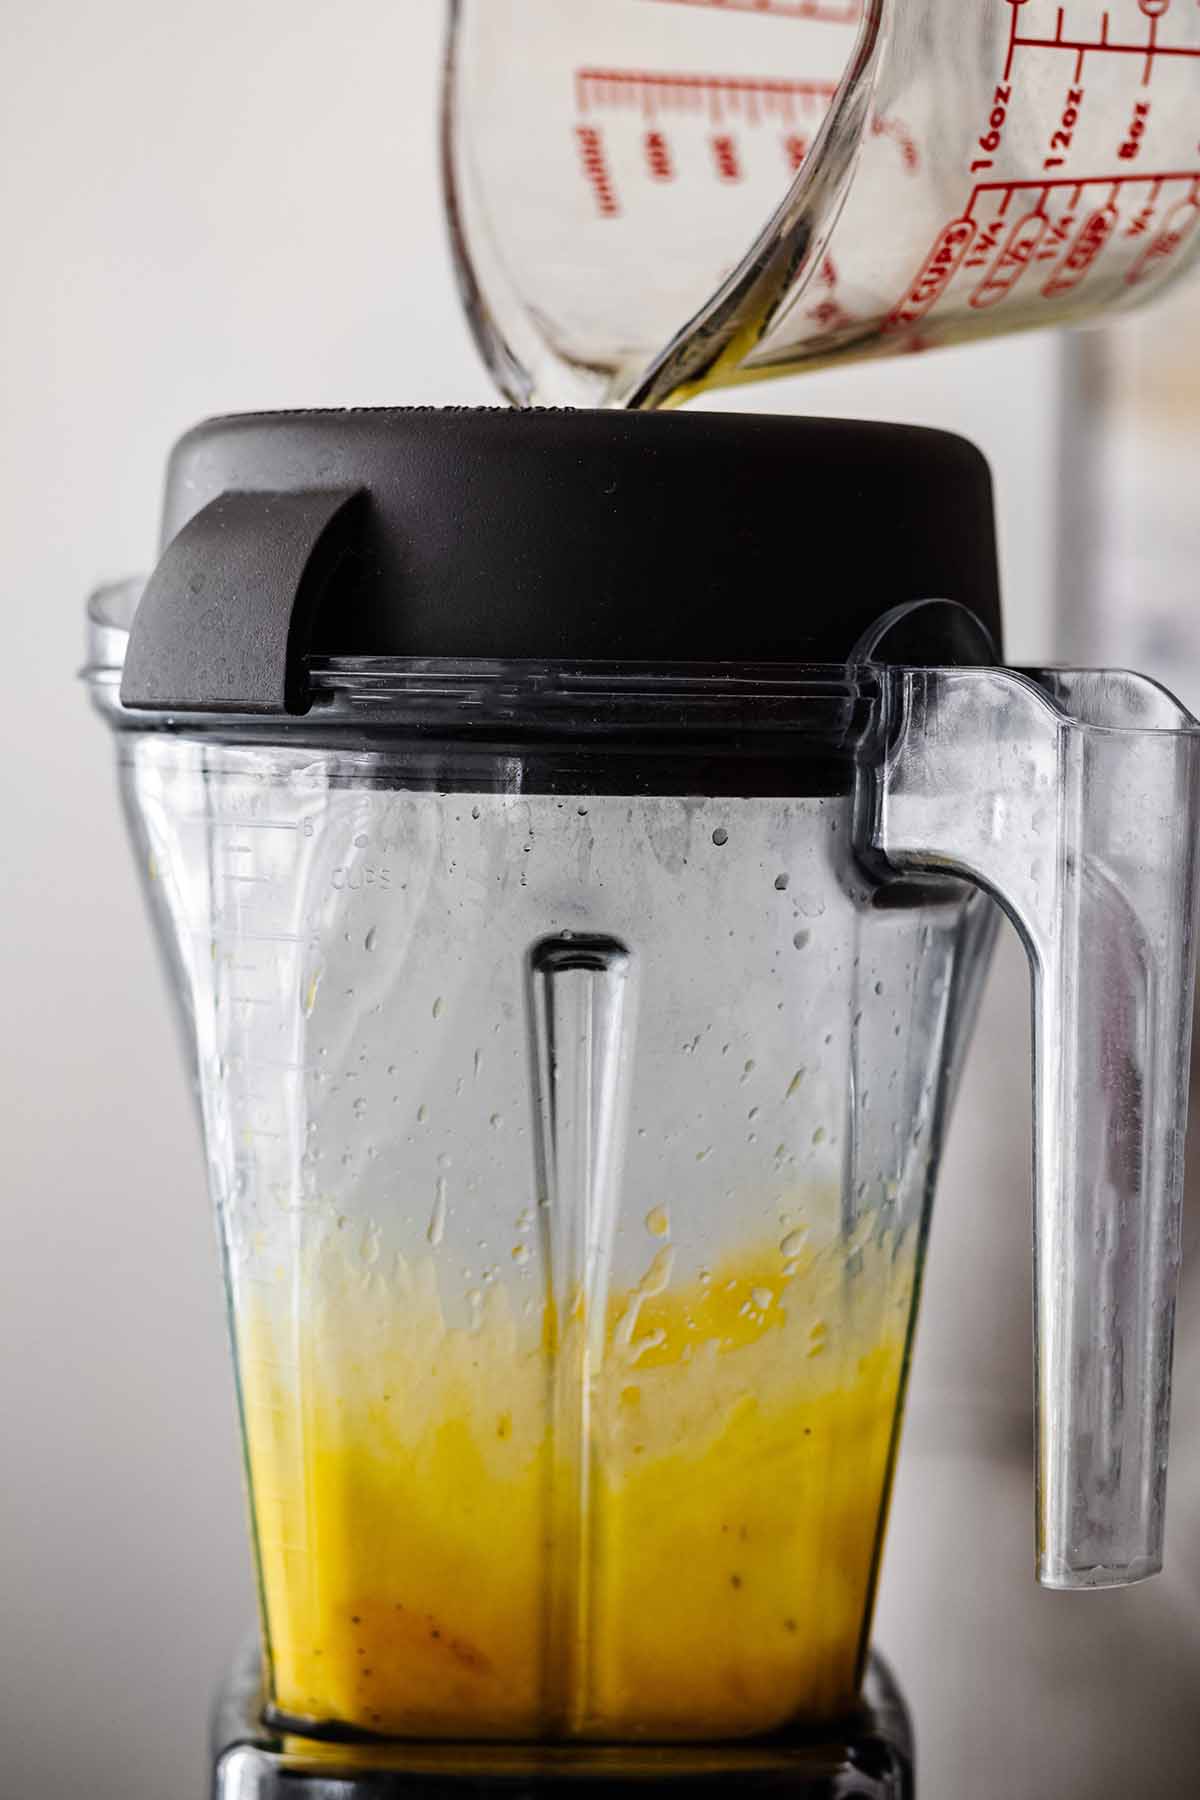 Melted butter being poured into a blender with egg yolk mixture.